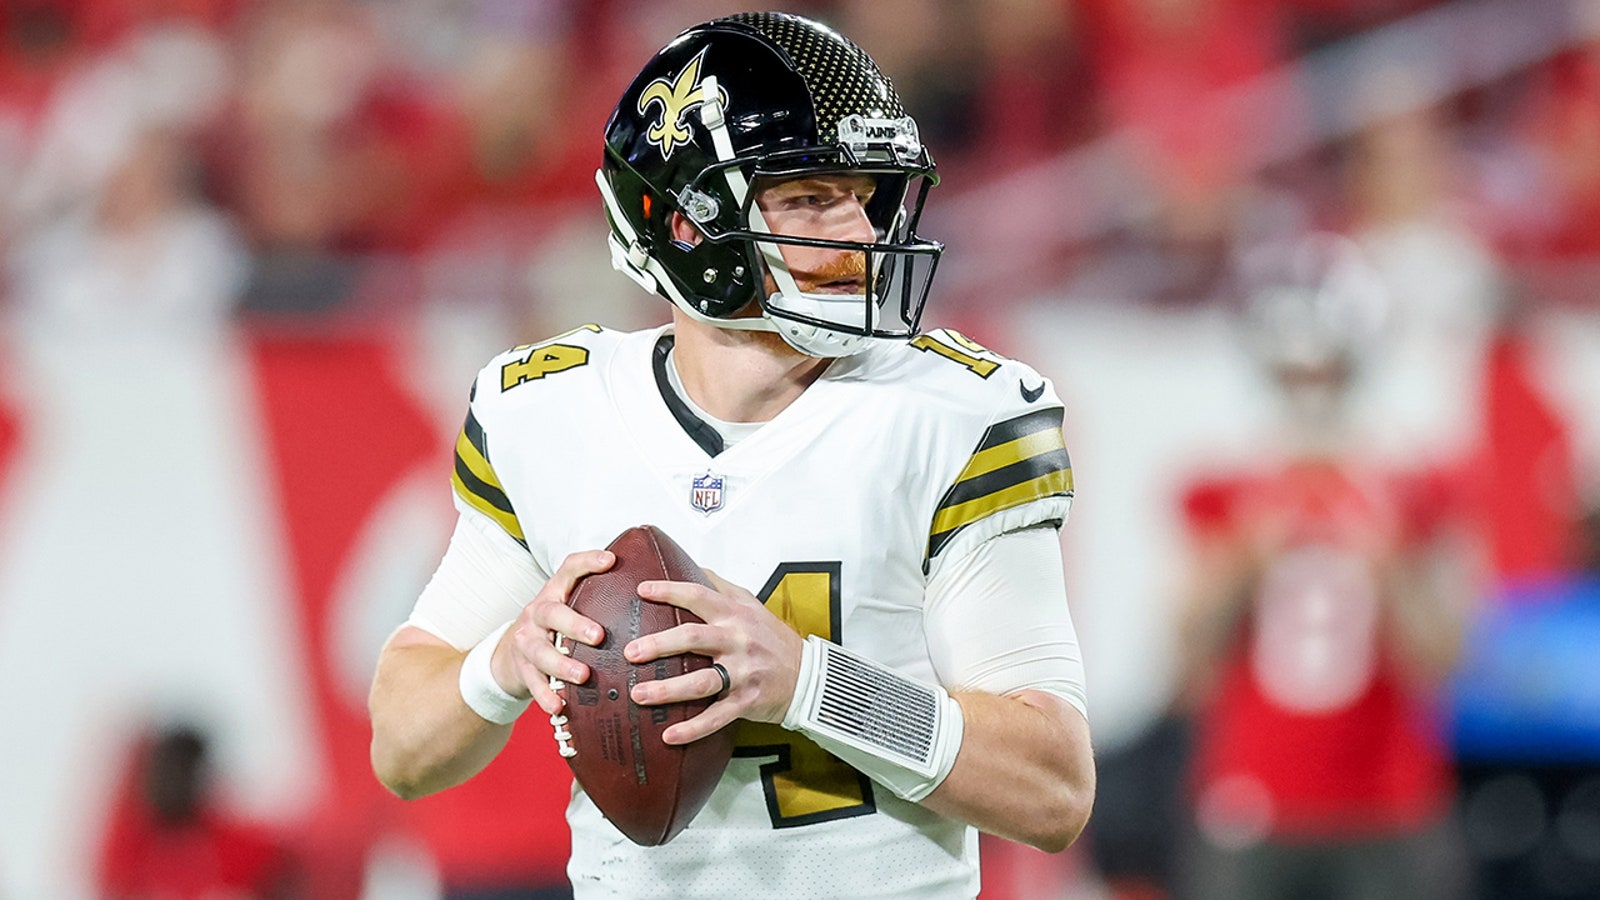 NFL Week 15: What should you bet on this weekend's Falcons vs. Saints?